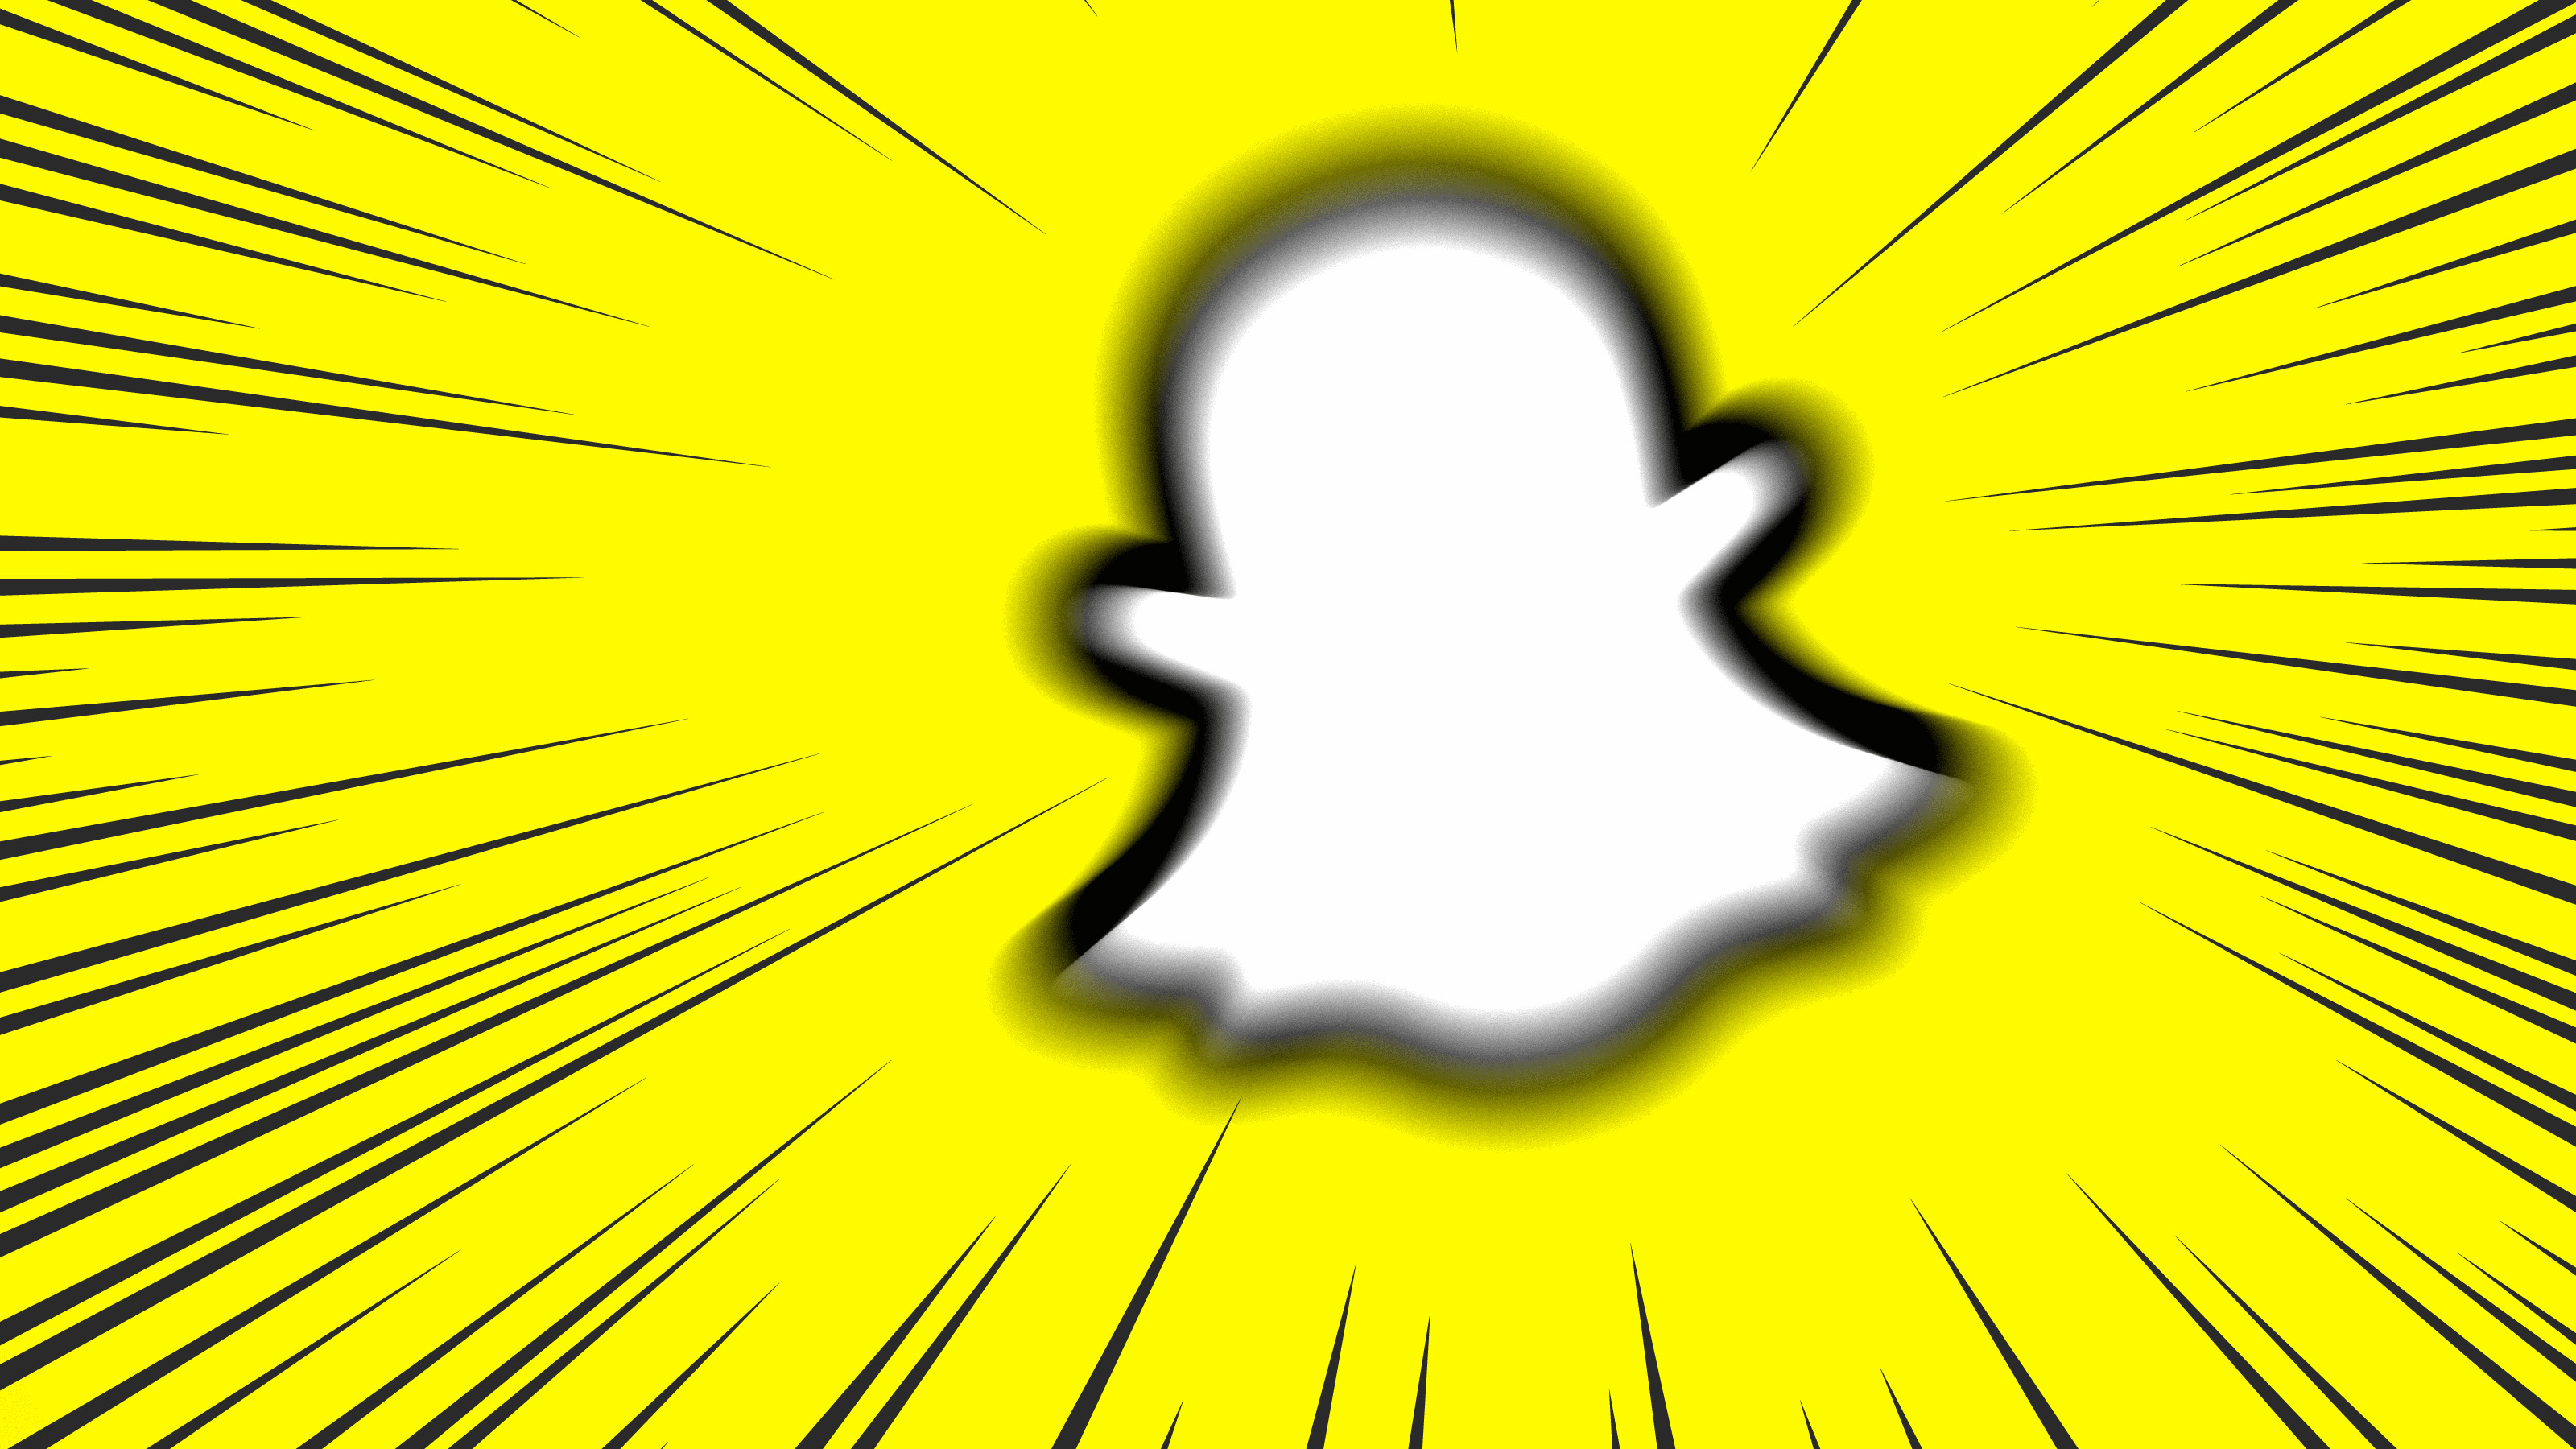 Snapchat is growing faster than Facebook and Twitter | TechCrunch